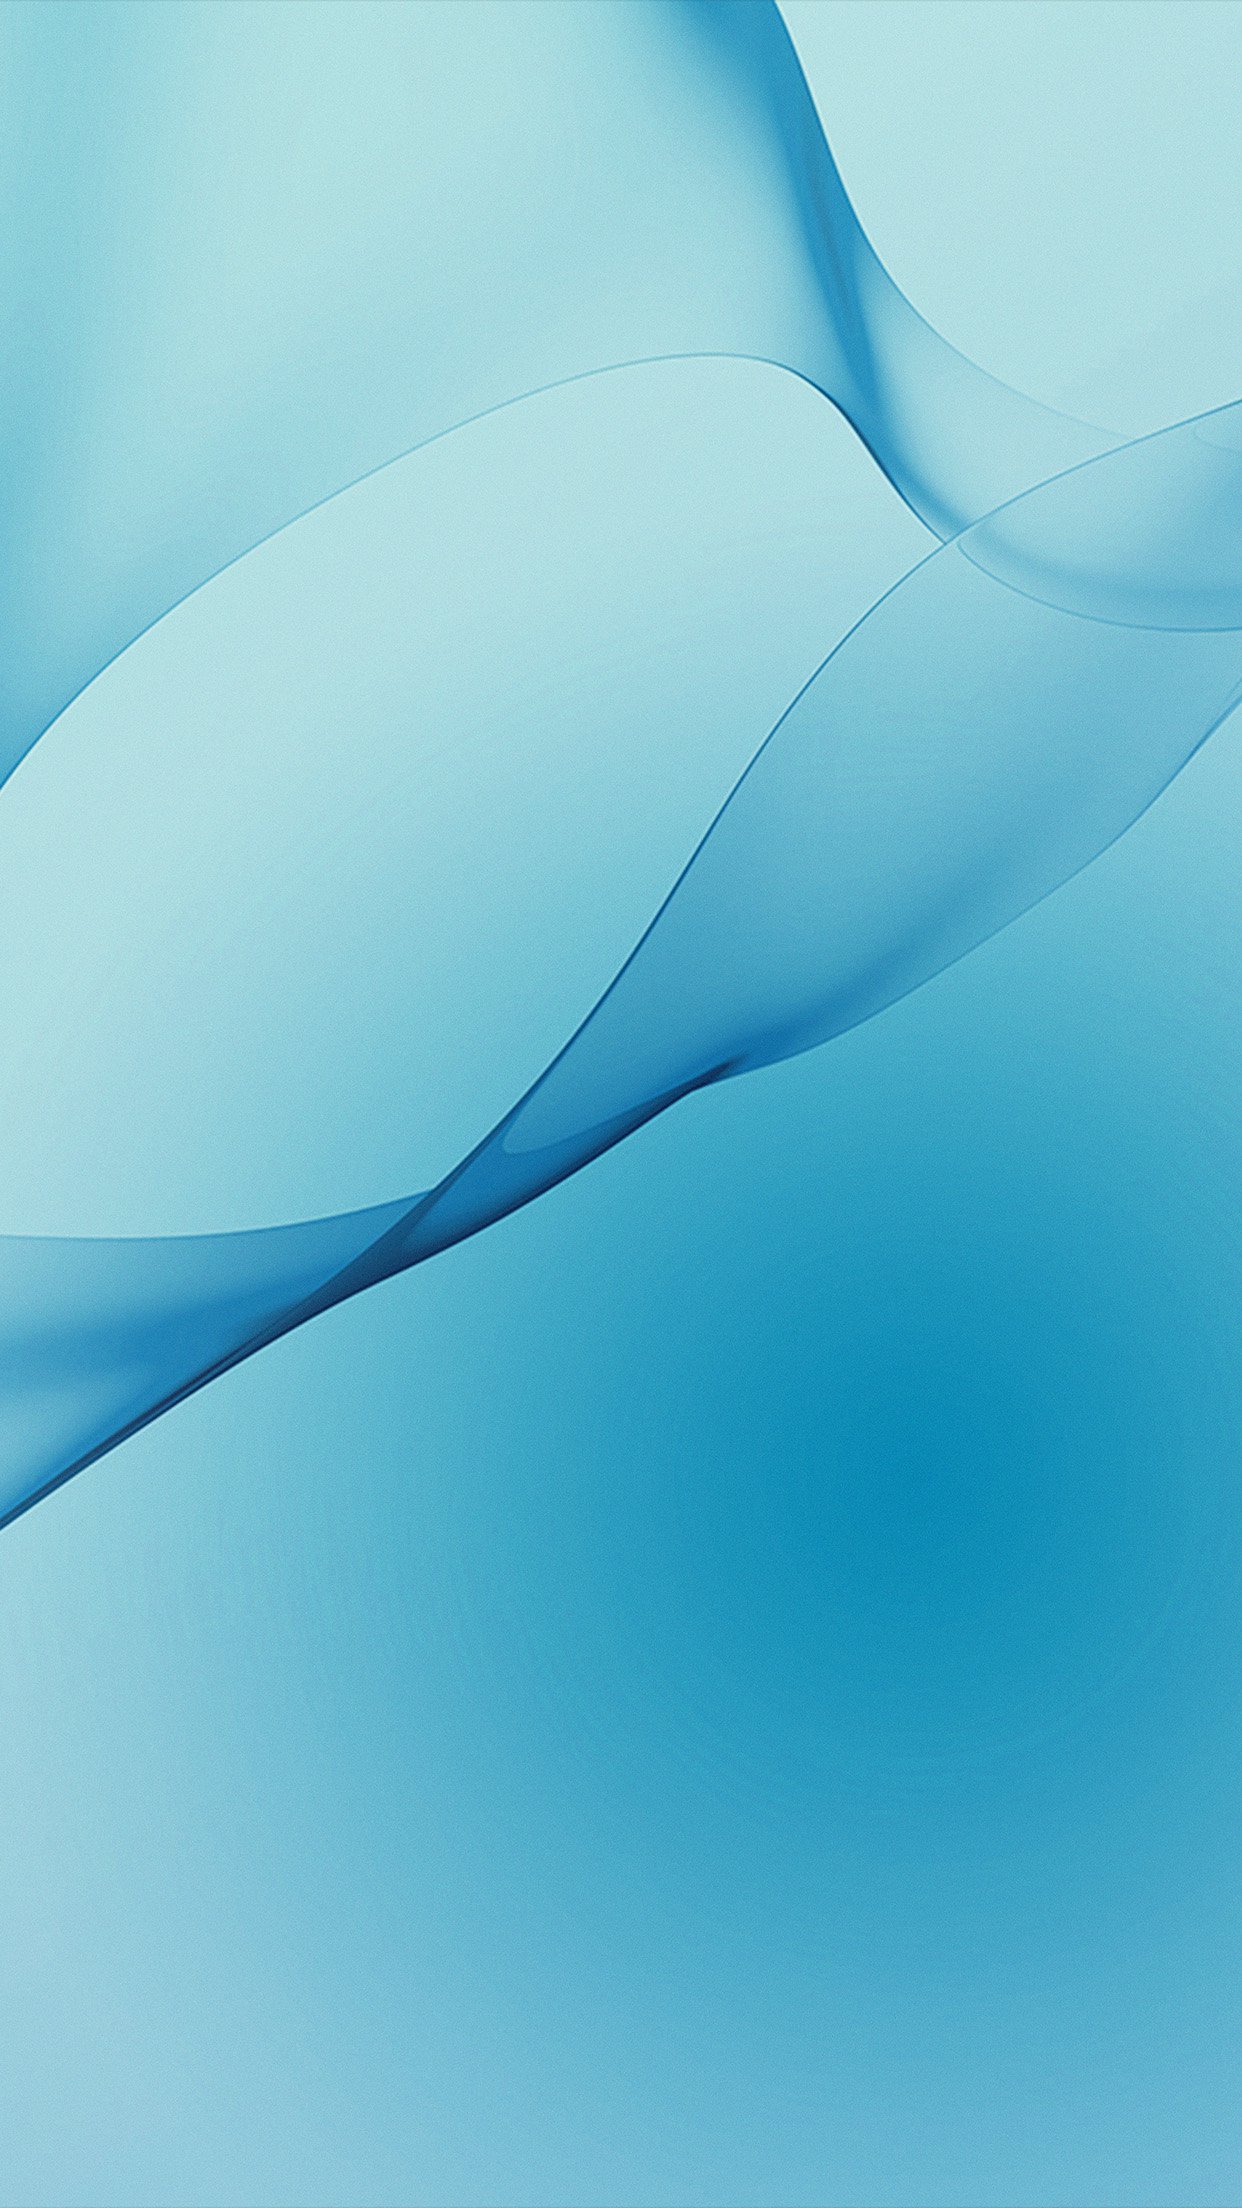 Abstract Blue Blue White Rhytm Pattern Android wallpaper